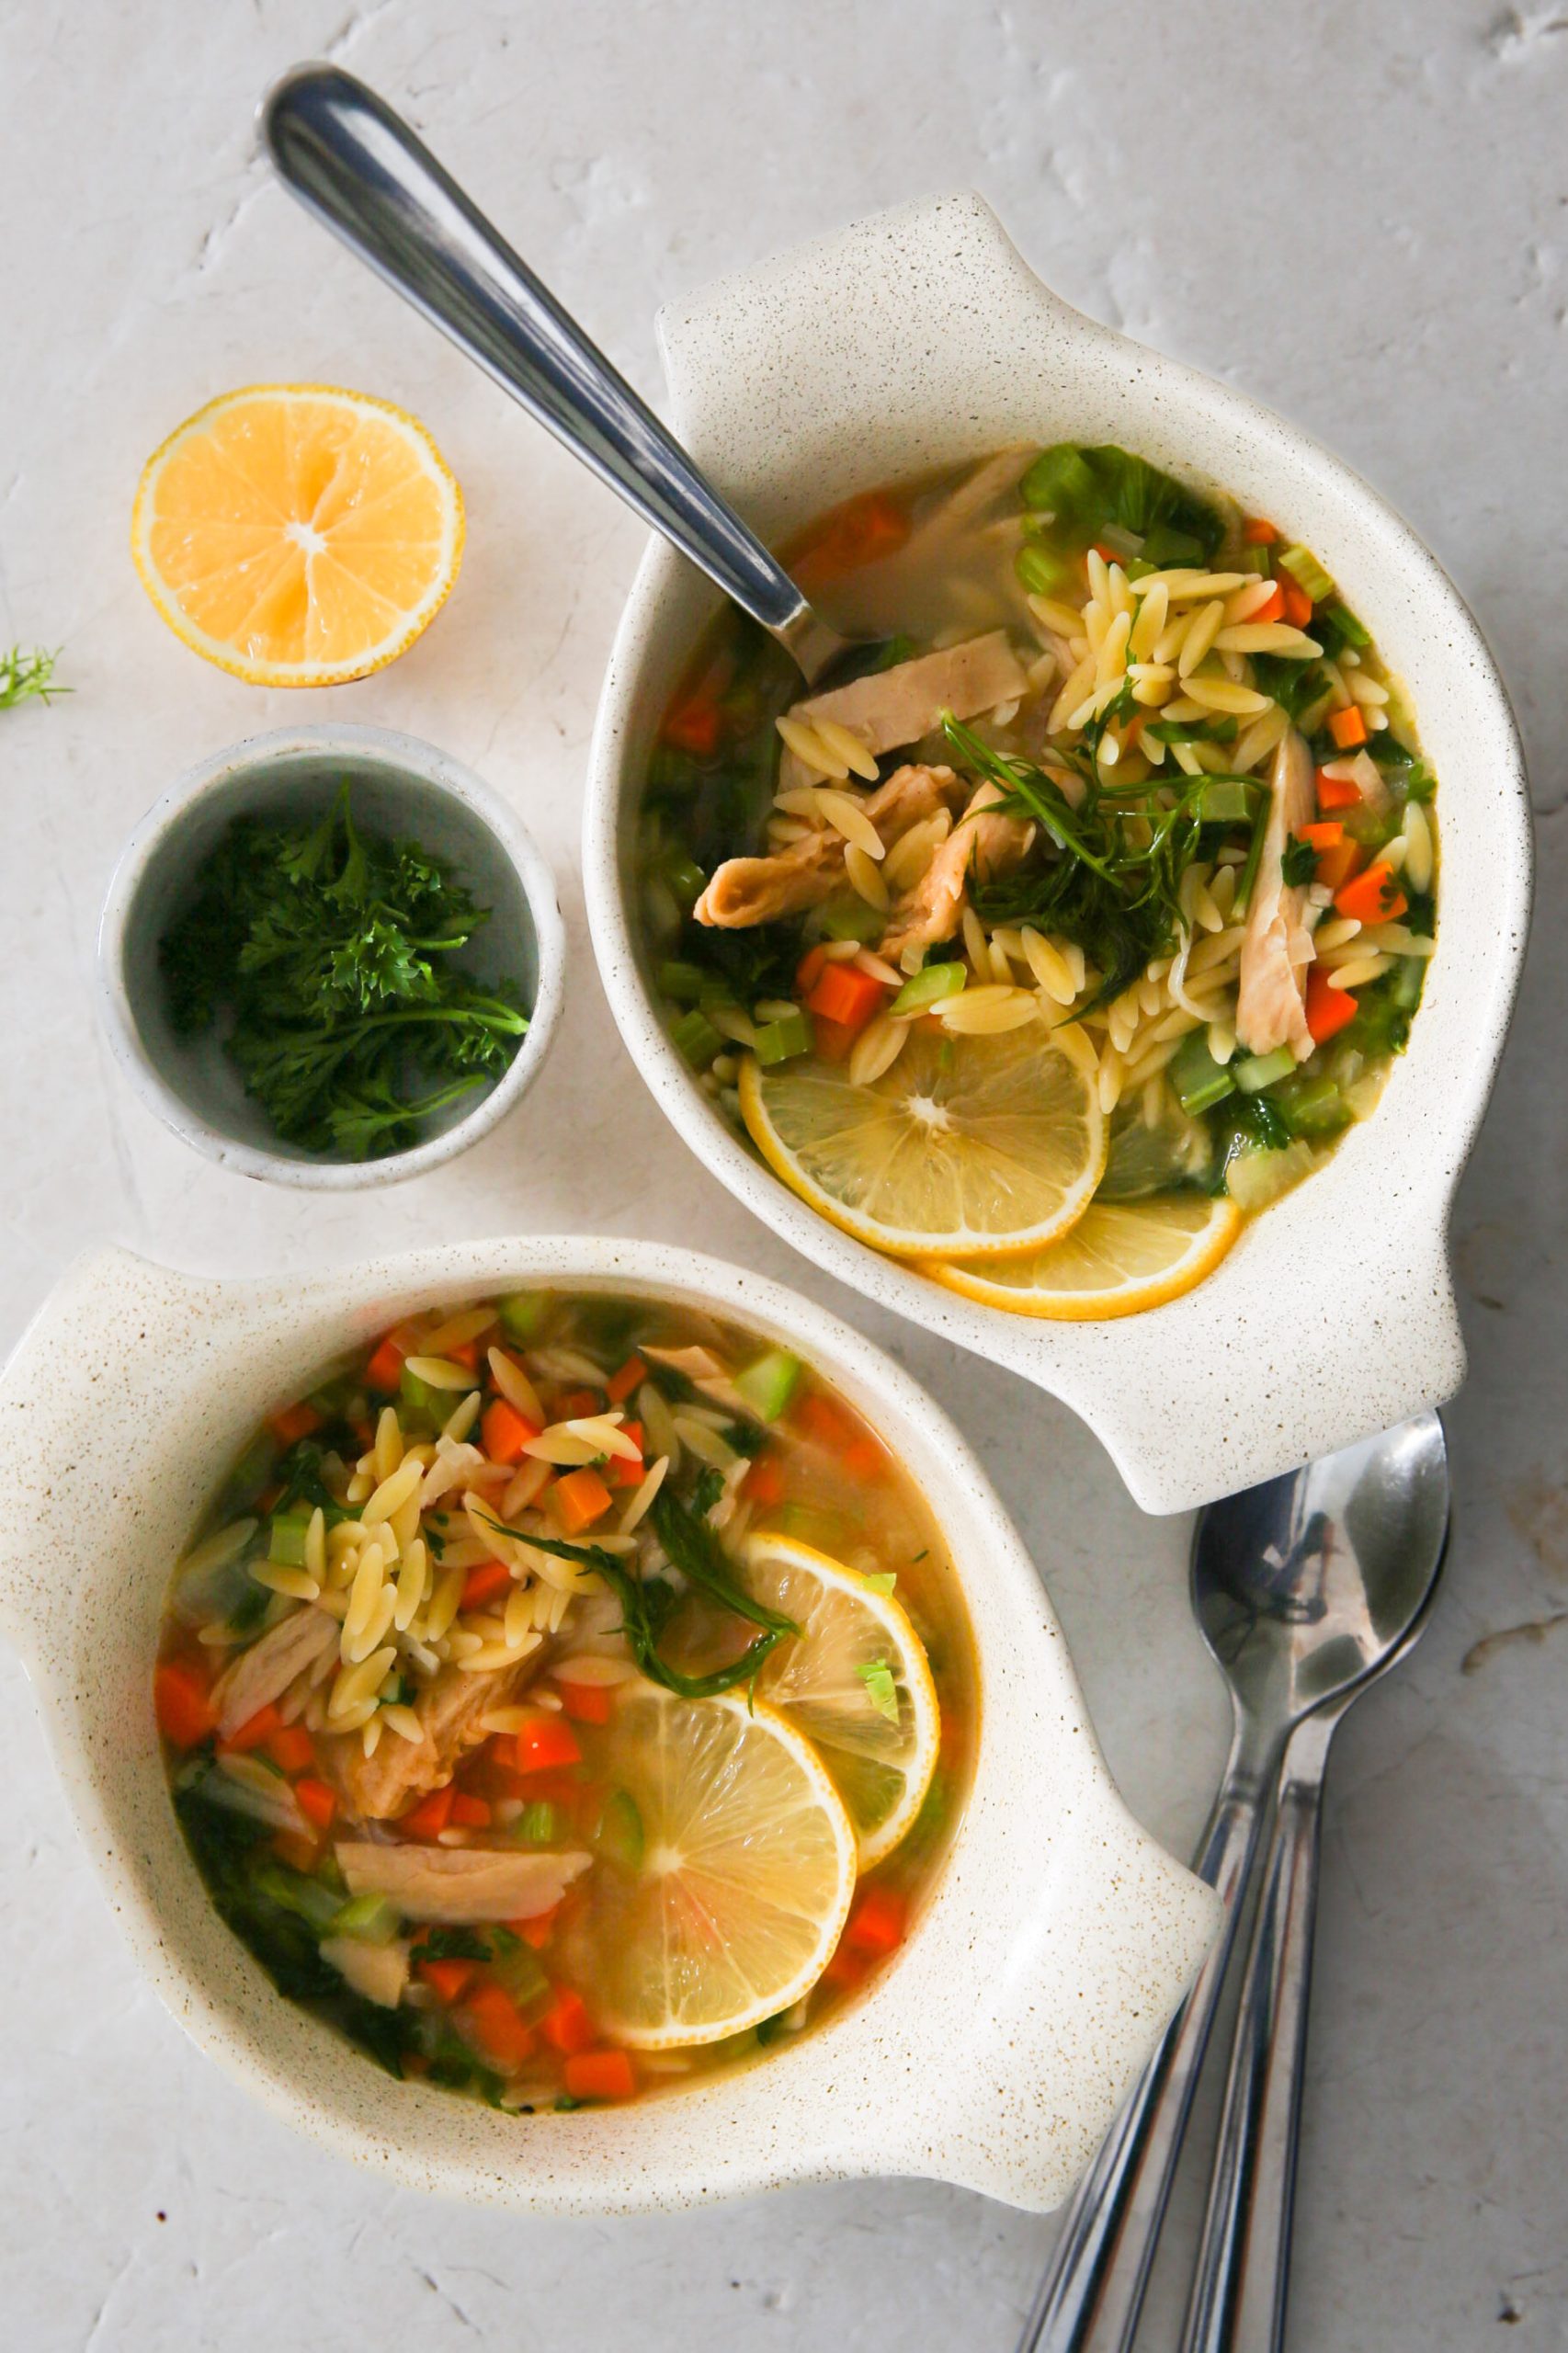 Two bowls of chicken noodle soup with lemon.